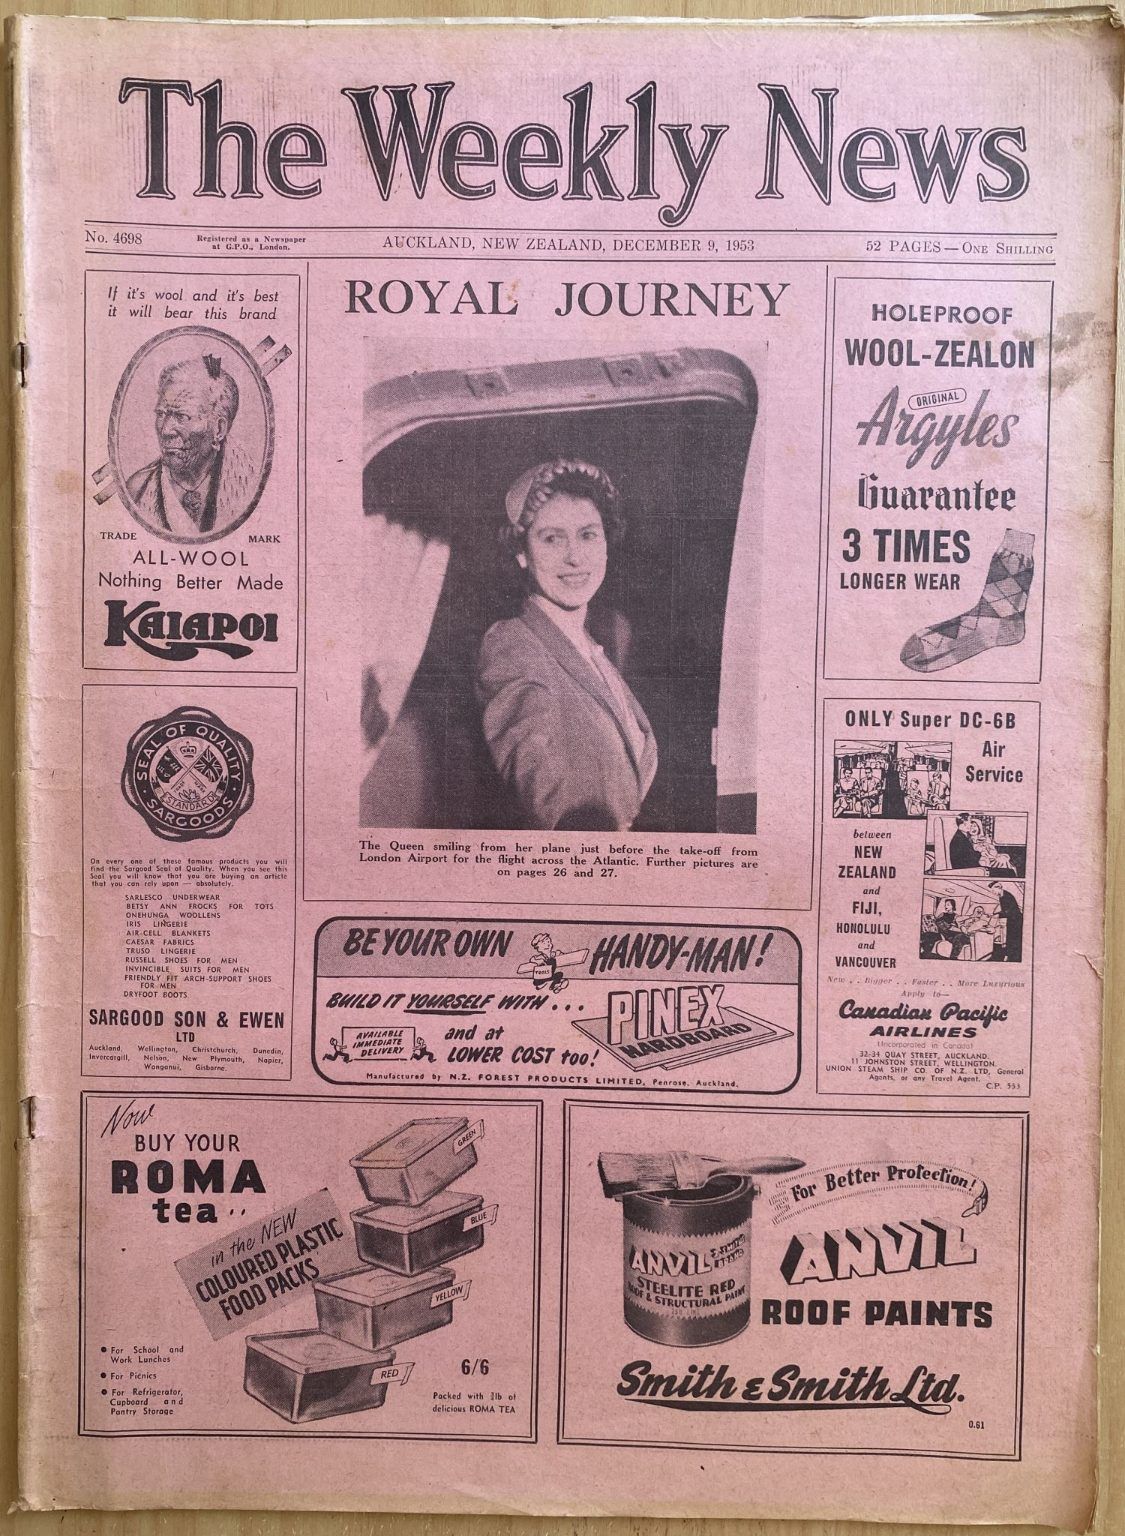 OLD NEWSPAPER: The Weekly News - No. 4698, 9 December 1953